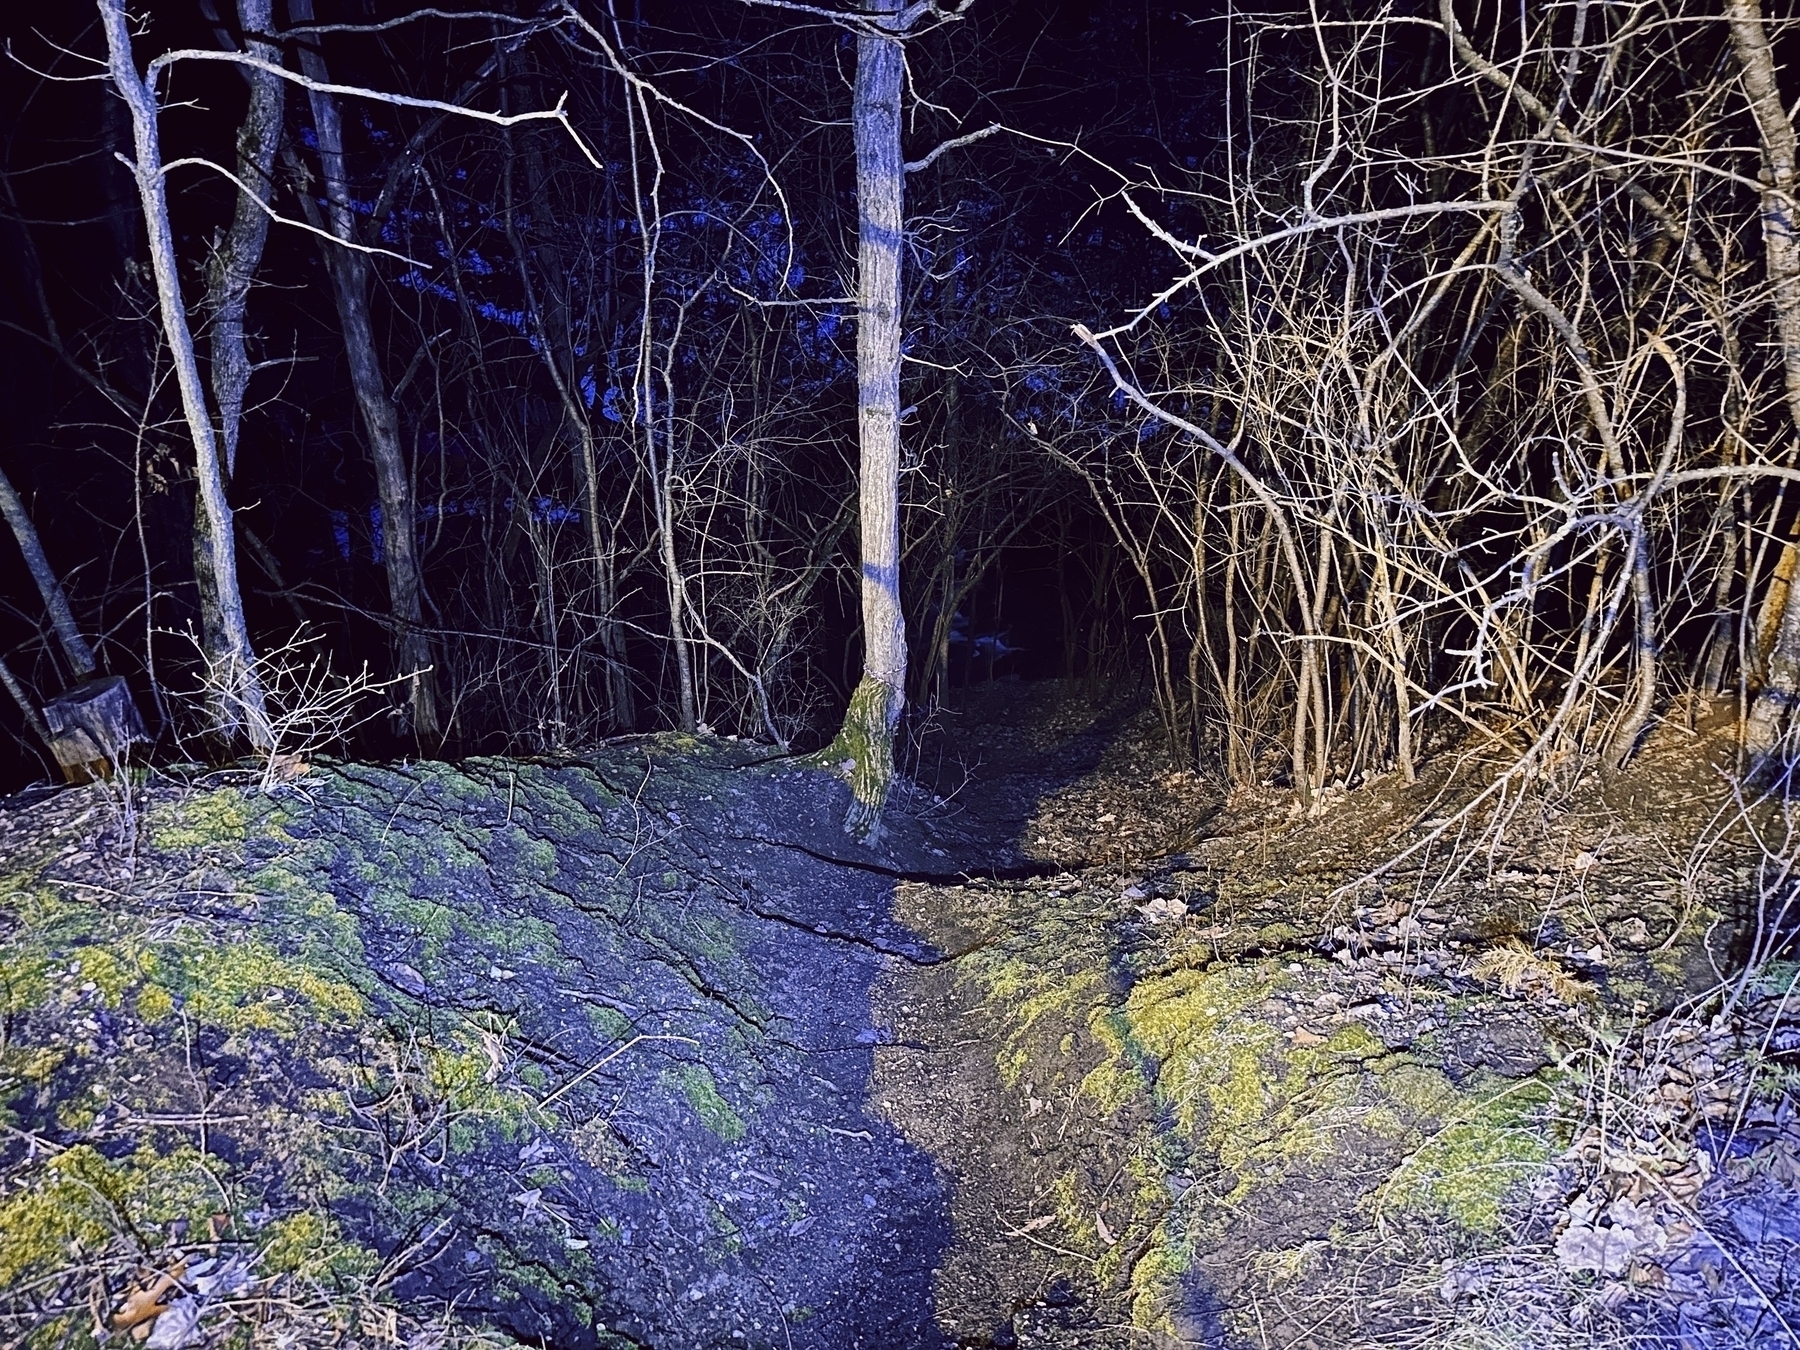 A moss-covered path leads into a dark, dense forest at night, illuminated by a light source from the viewpoint.